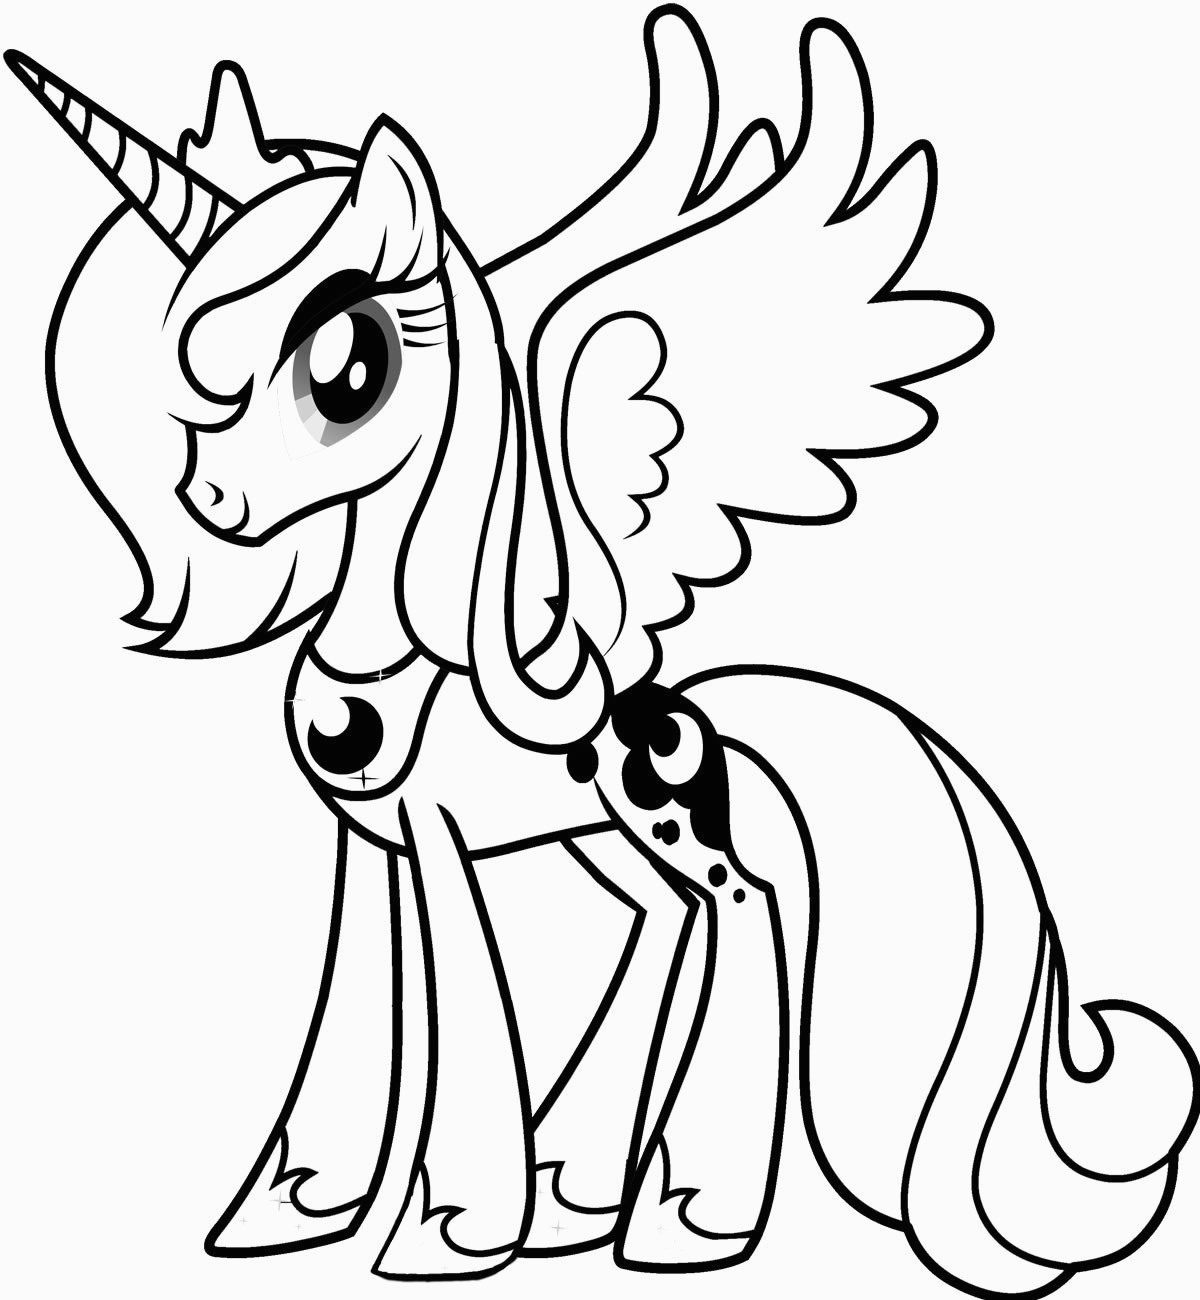 Free Printable My Little Pony Coloring Pages For Kids For My Little - Free Printable Coloring Pages Of My Little Pony